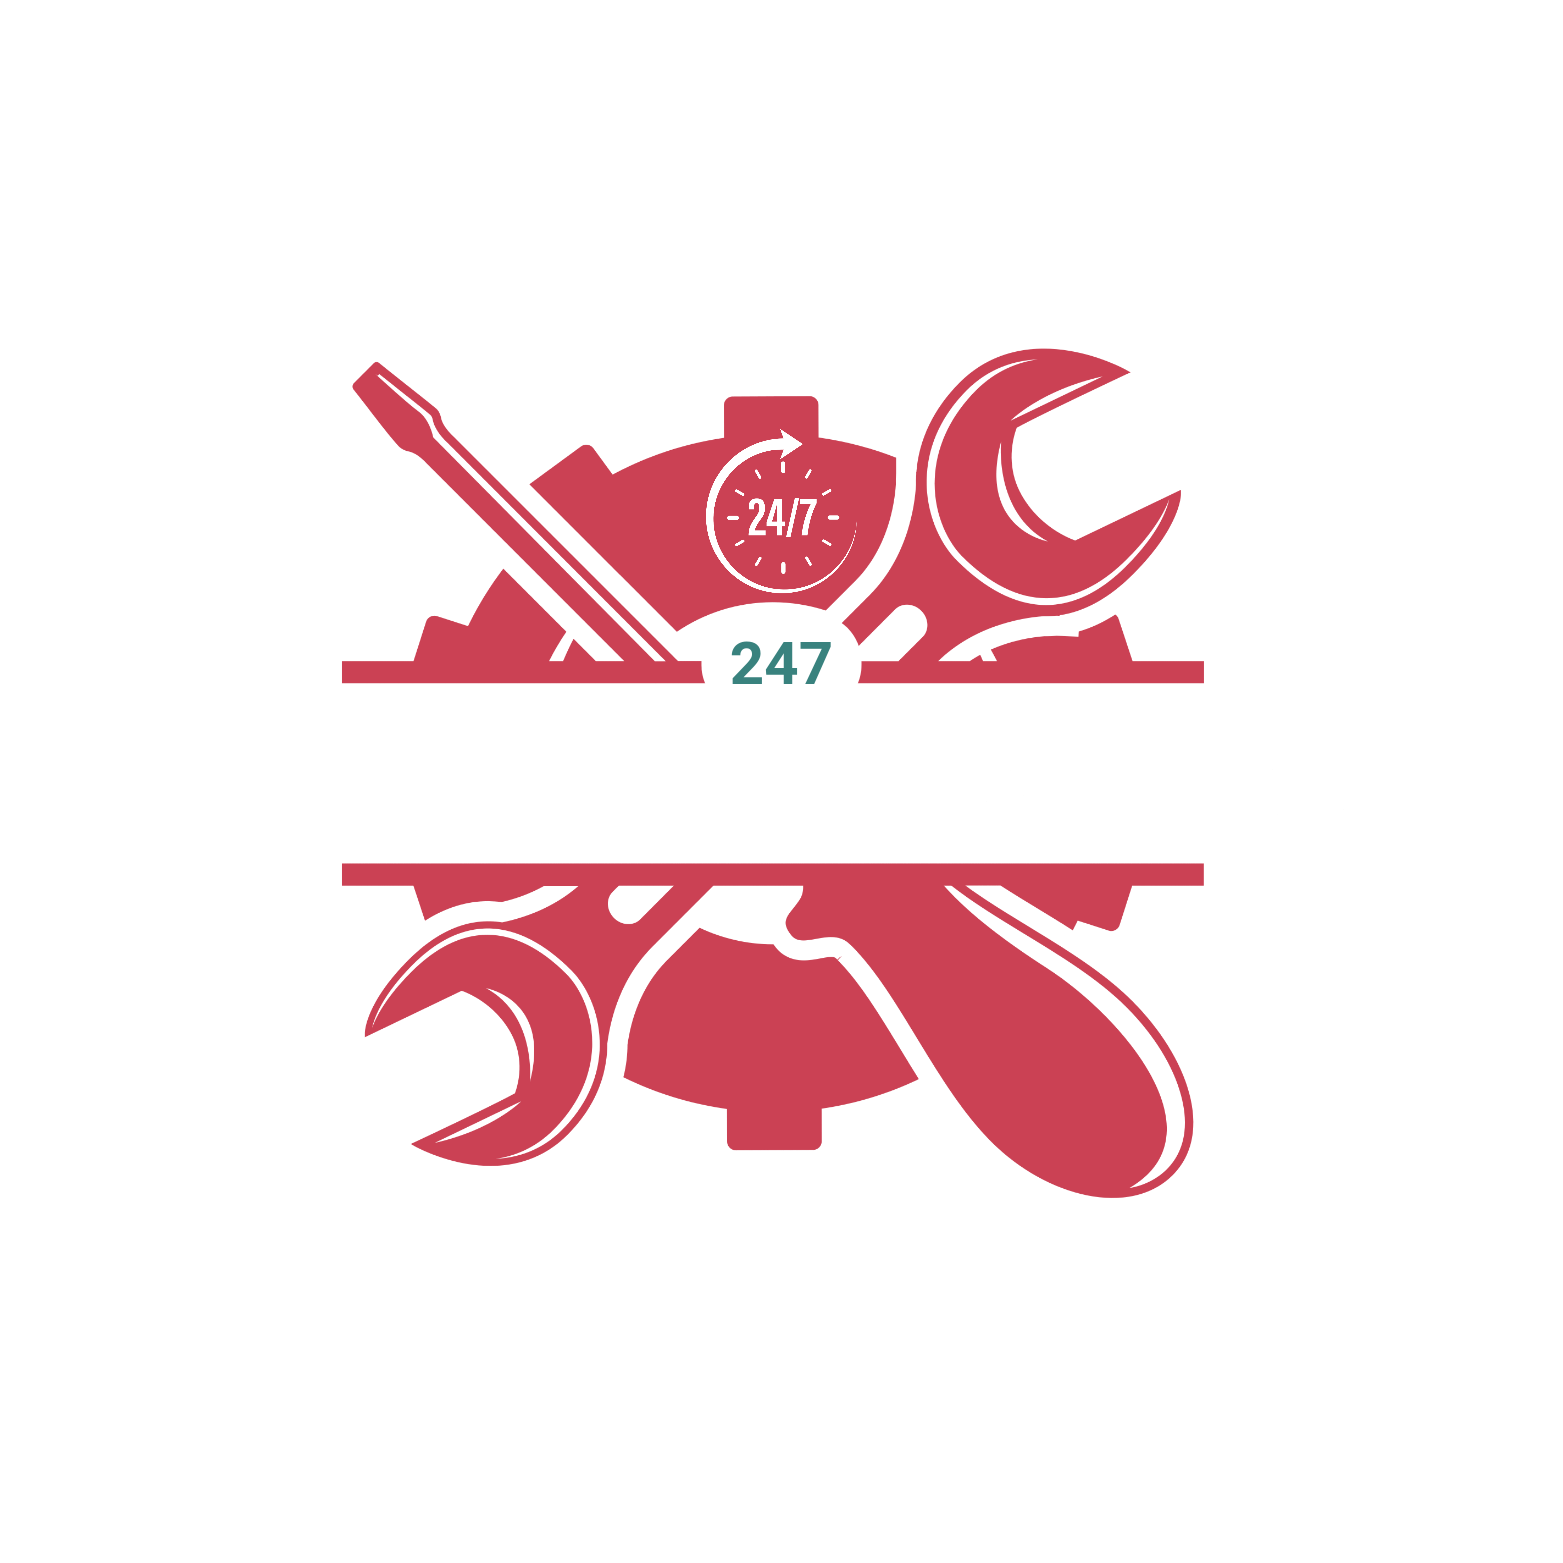 Logo of Electrical Solutions 247 Ltd